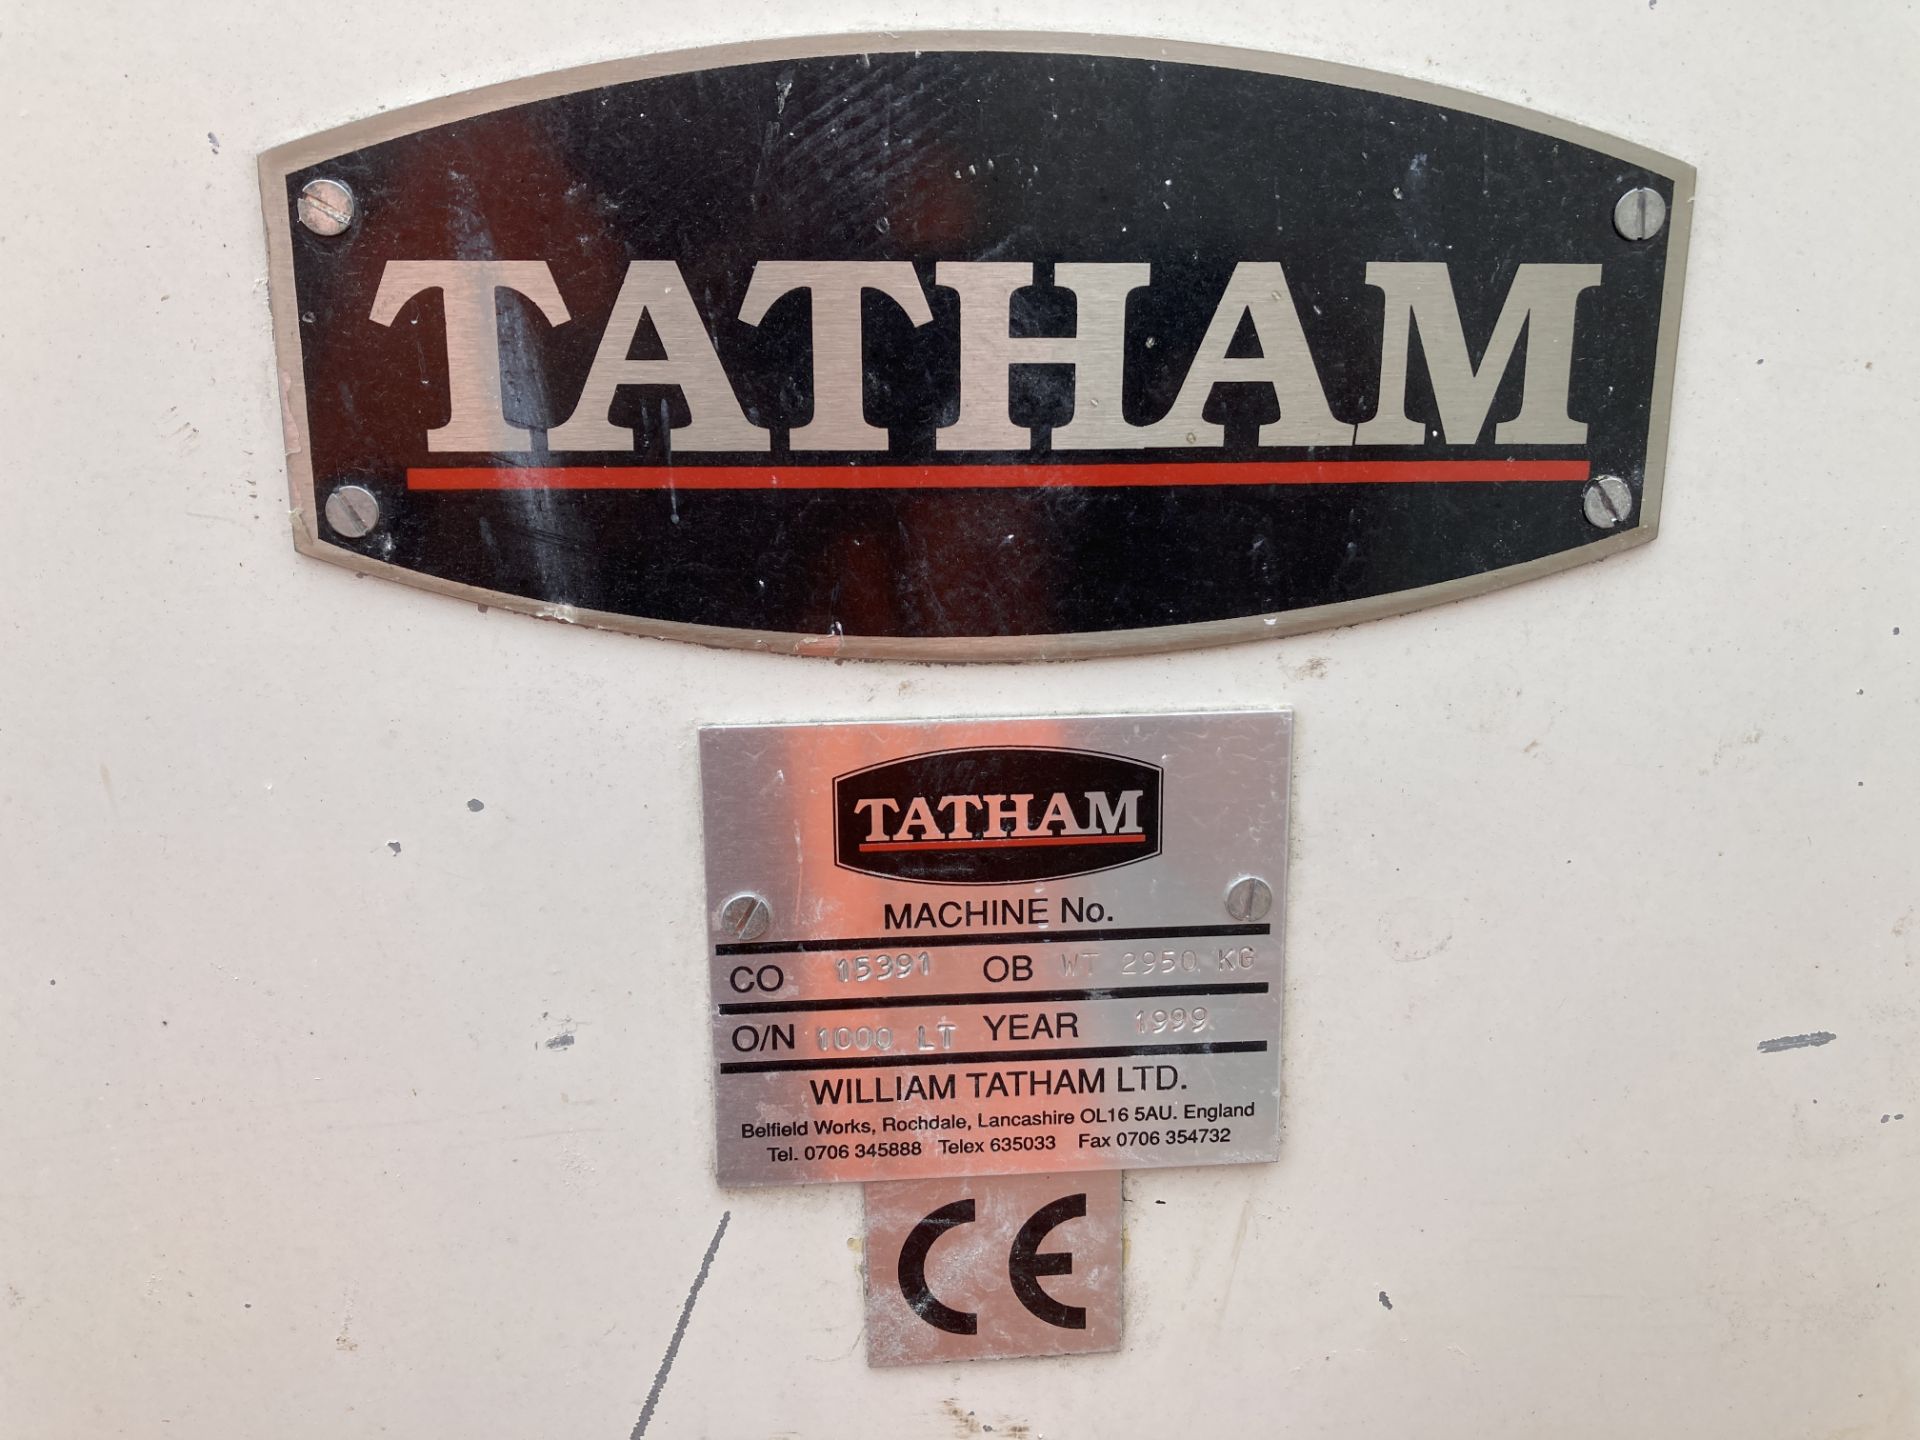 Tatham approx. 1,000 litre 304 STAINLESS STEEL TWIN SHAFT PADDLE MIXER, serial no. 15391, year of - Image 6 of 6